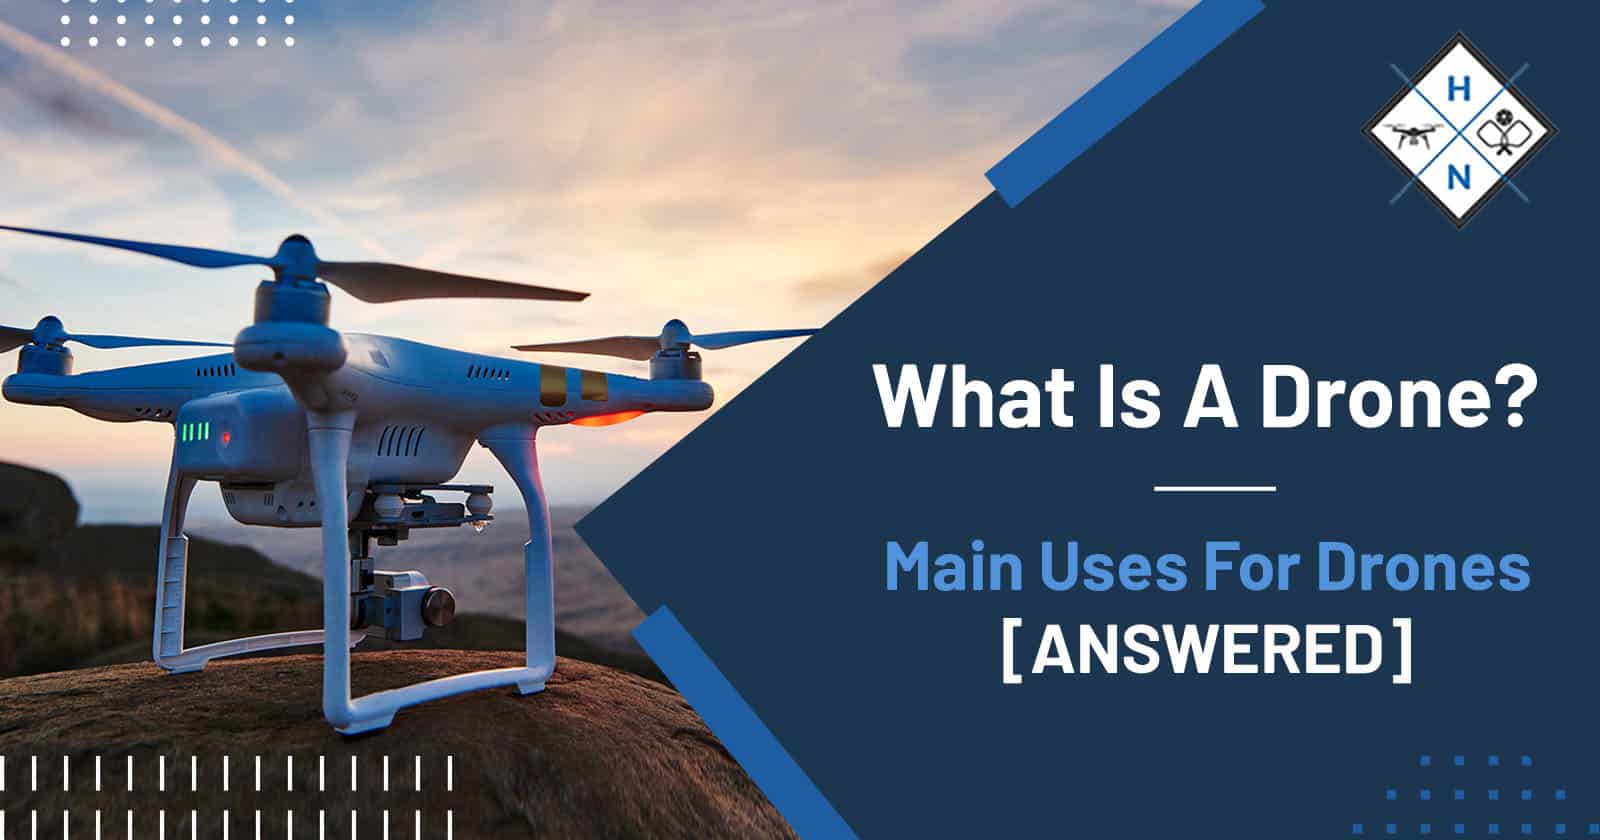 What Is A Drone? Main Uses For Drones [ANSWERED]